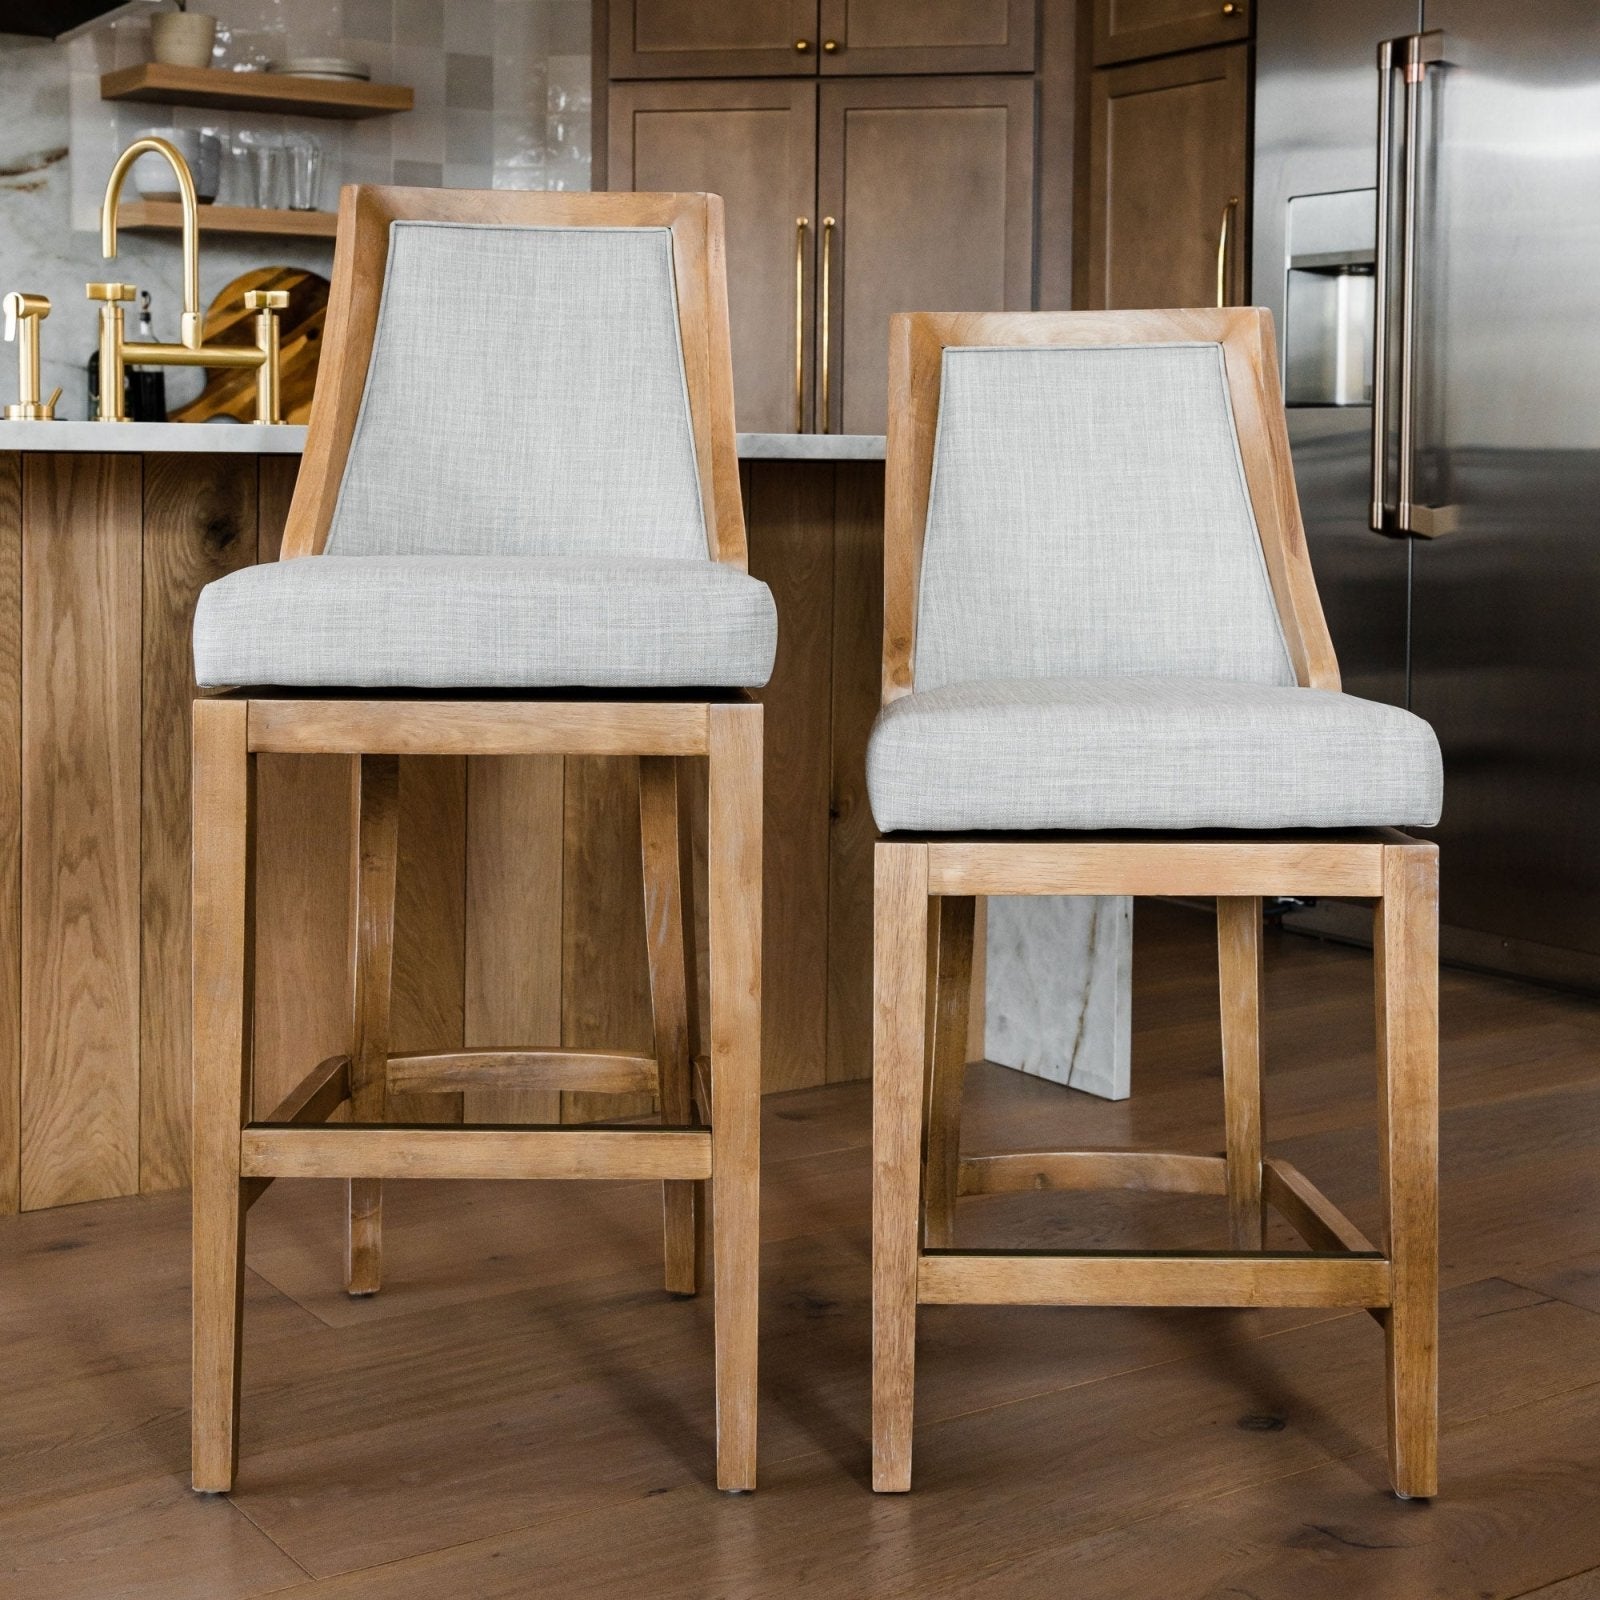 Vienna Bar Stool in Weathered Oak Finish with Sand Color Fabric Upholstery in Stools by Maven Lane